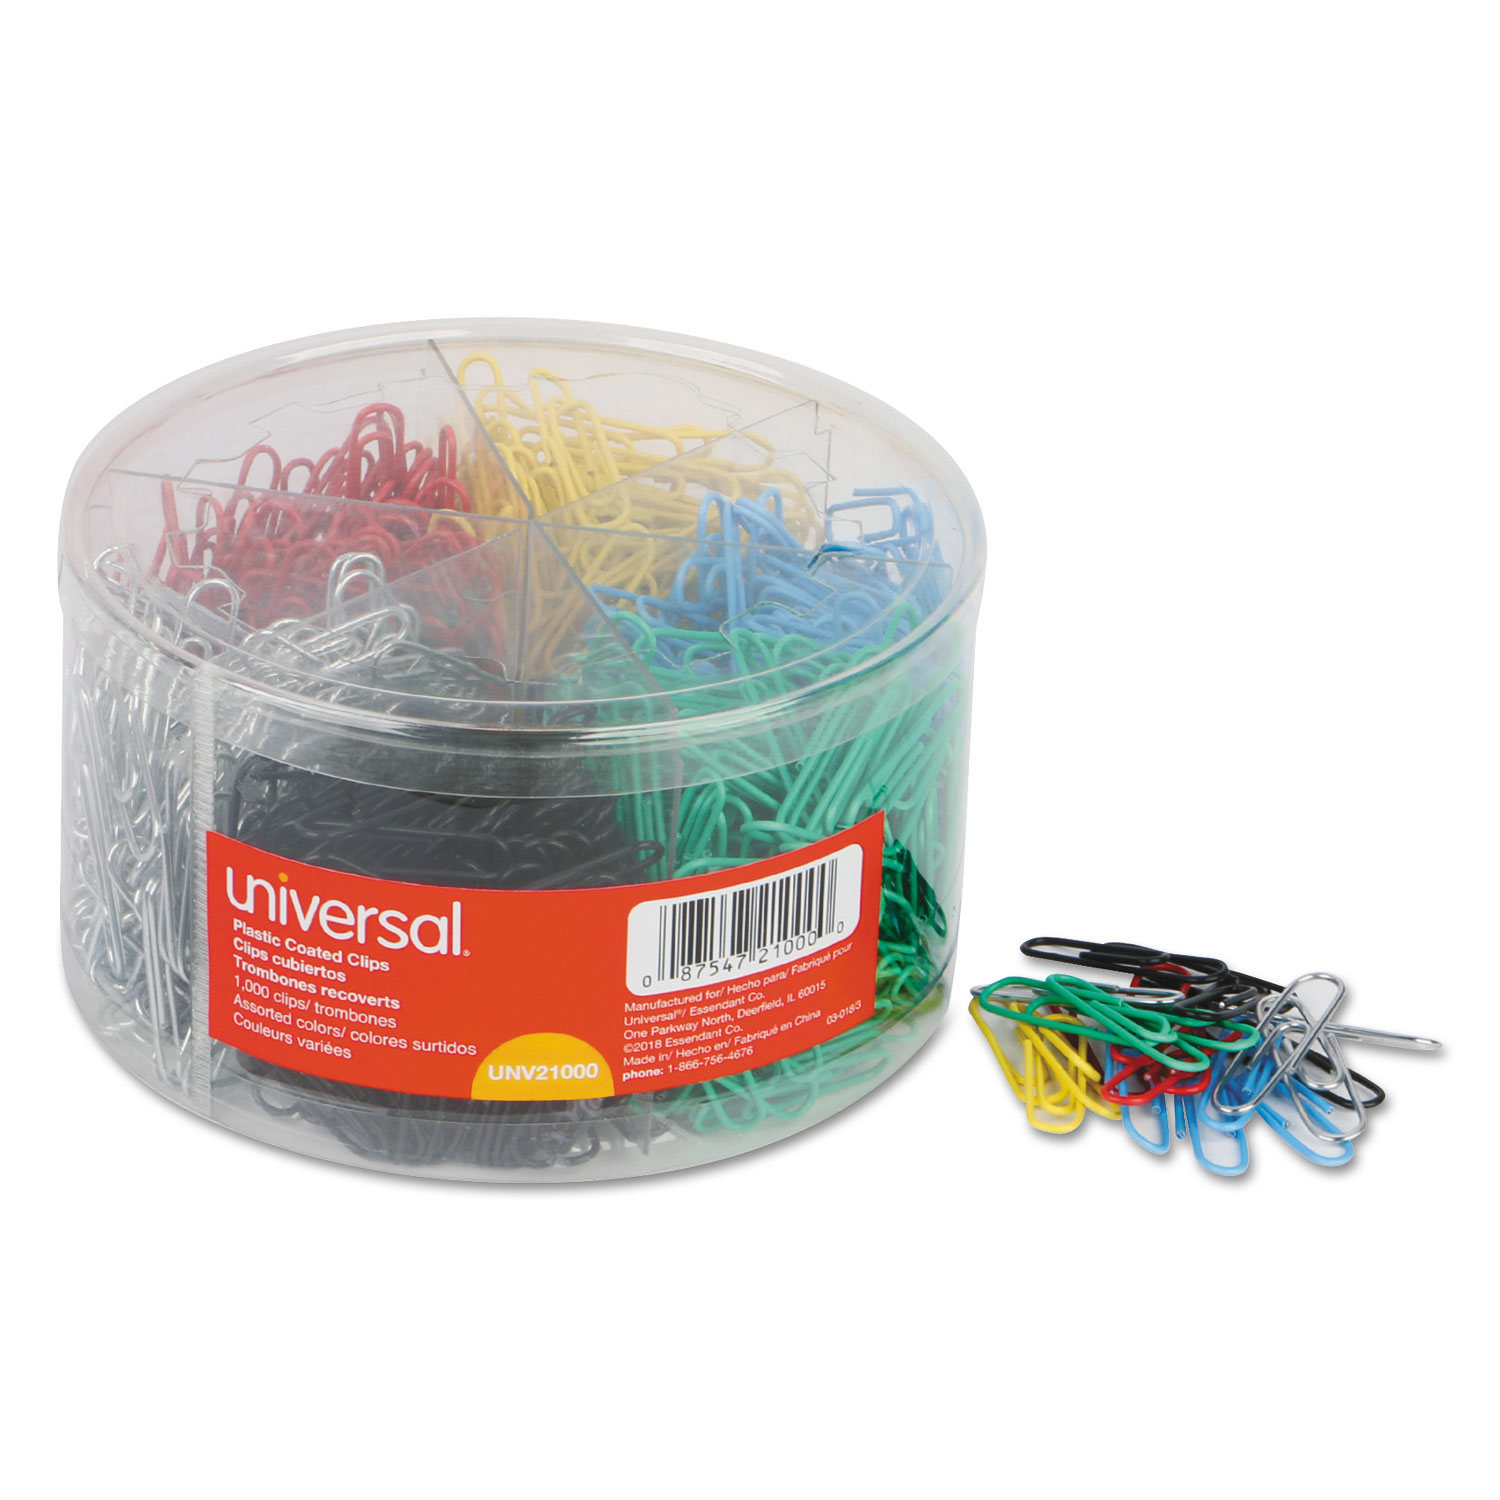  Universal UNV21000 Plastic-Coated Paper Clips, Small (No. 1), Assorted Colors, 1,000/Pack (UNV21000) 